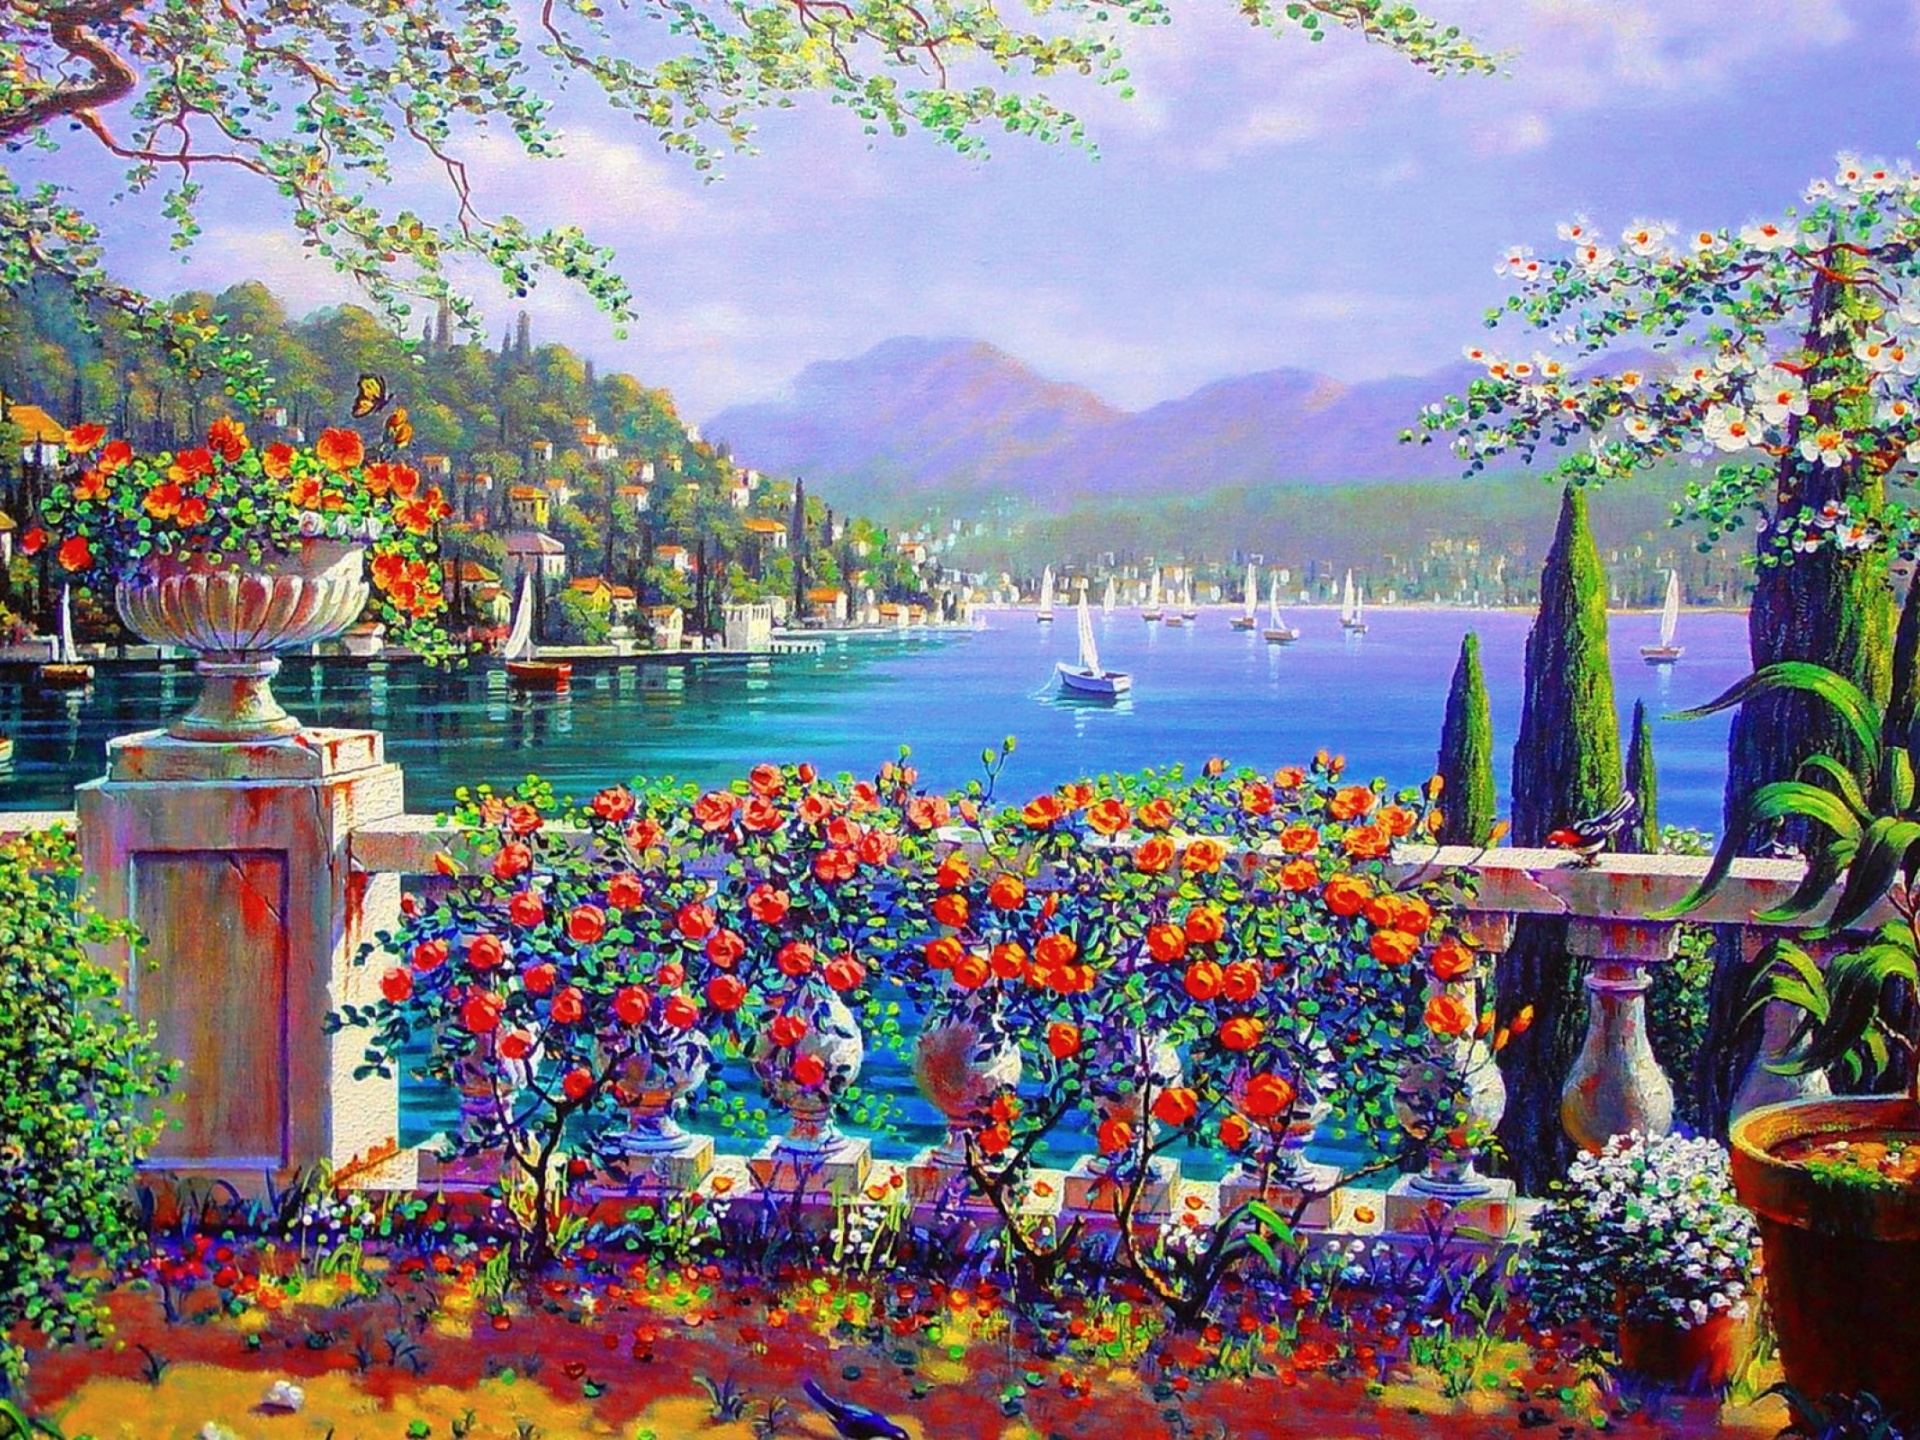 Painting Terrace Italy Landscape Sea Boat Tree Flower Colorful 1920x1440